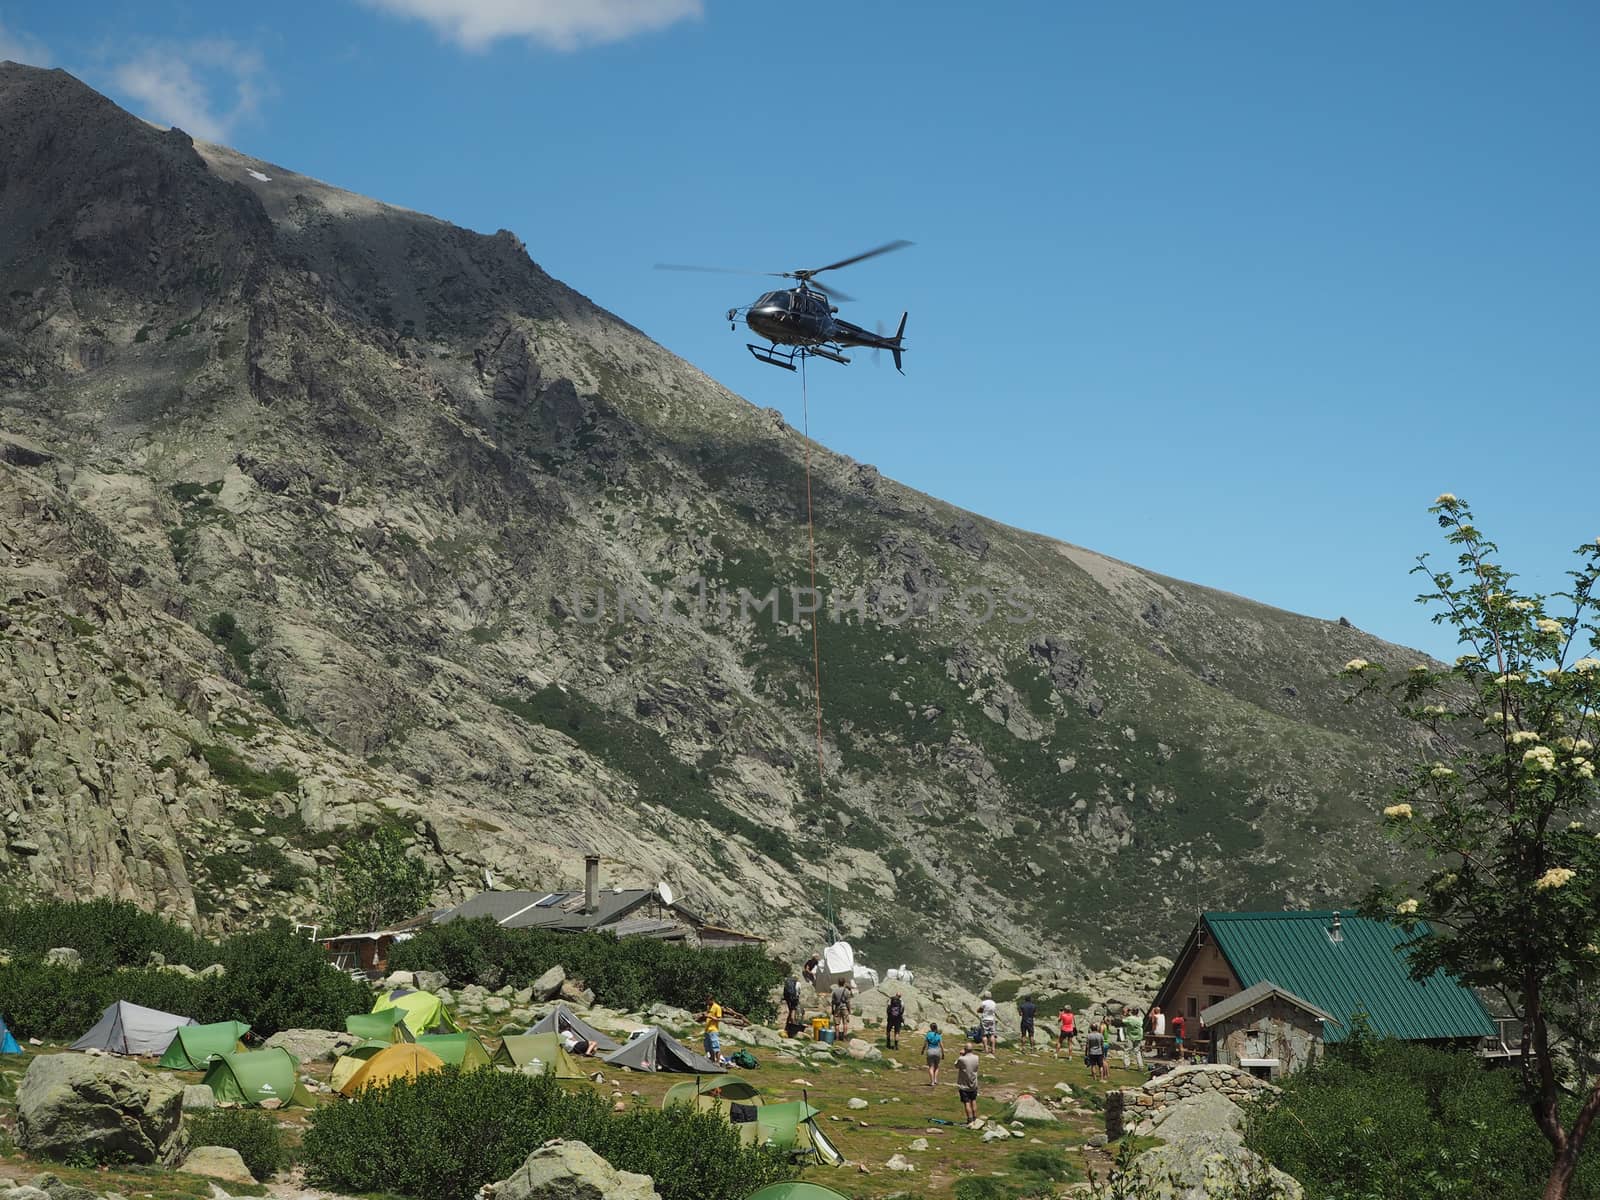 France, Corsica, Corsician Alps, June 19, 2017: helicopter dropping off supplies for mountain camp Refuge de Pietra Piana on famous hiking trail GR20, rocks, tents, tree and blue sky background by Henkeova